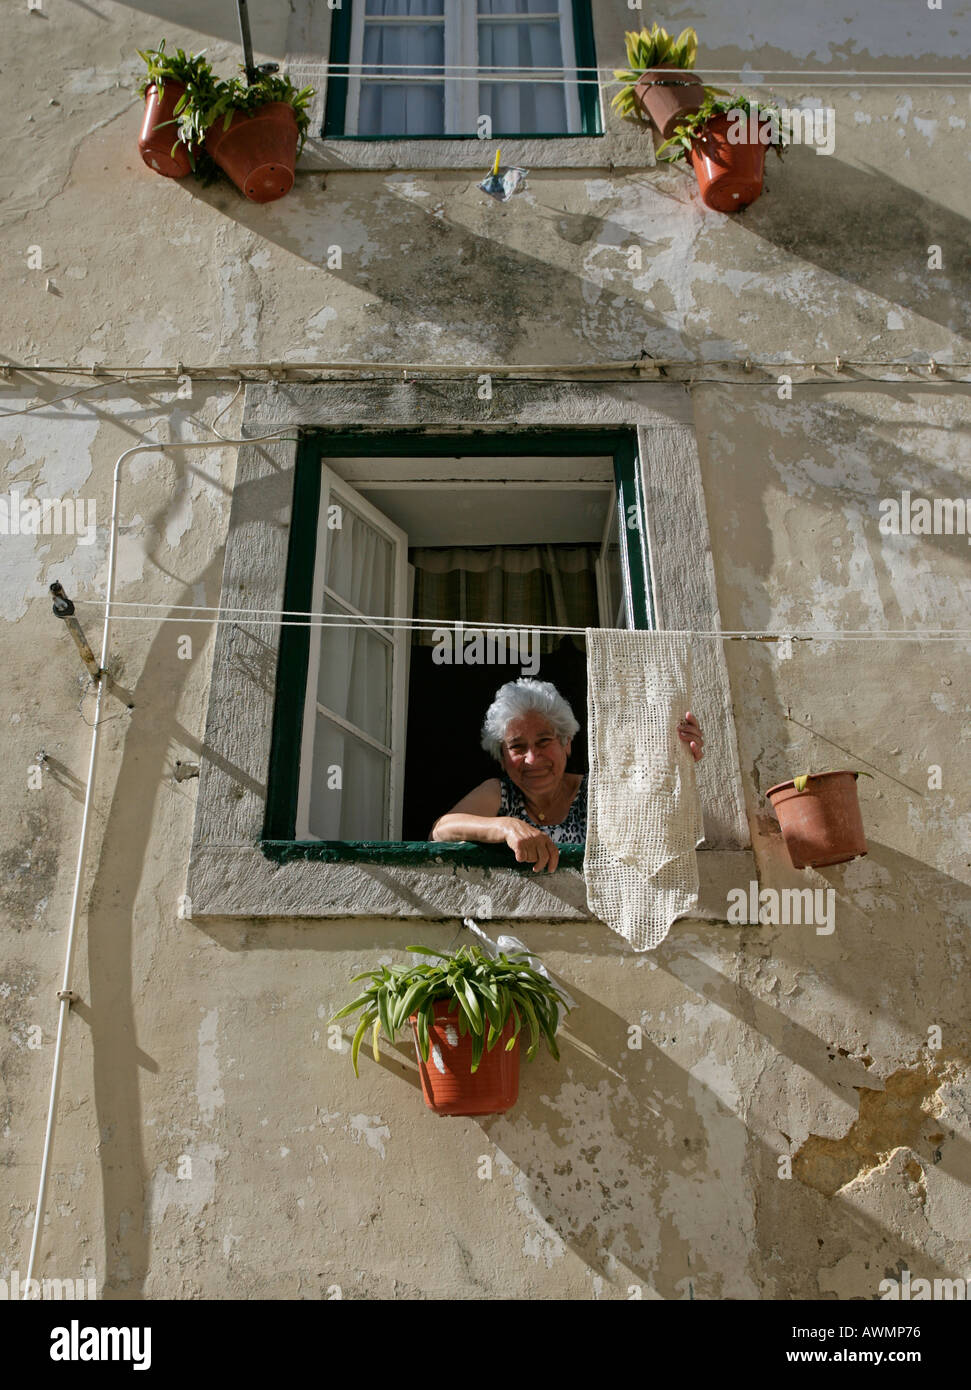 A woman hangs laundry out to dry outside her second story window in Sintra Portugal Stock Photo